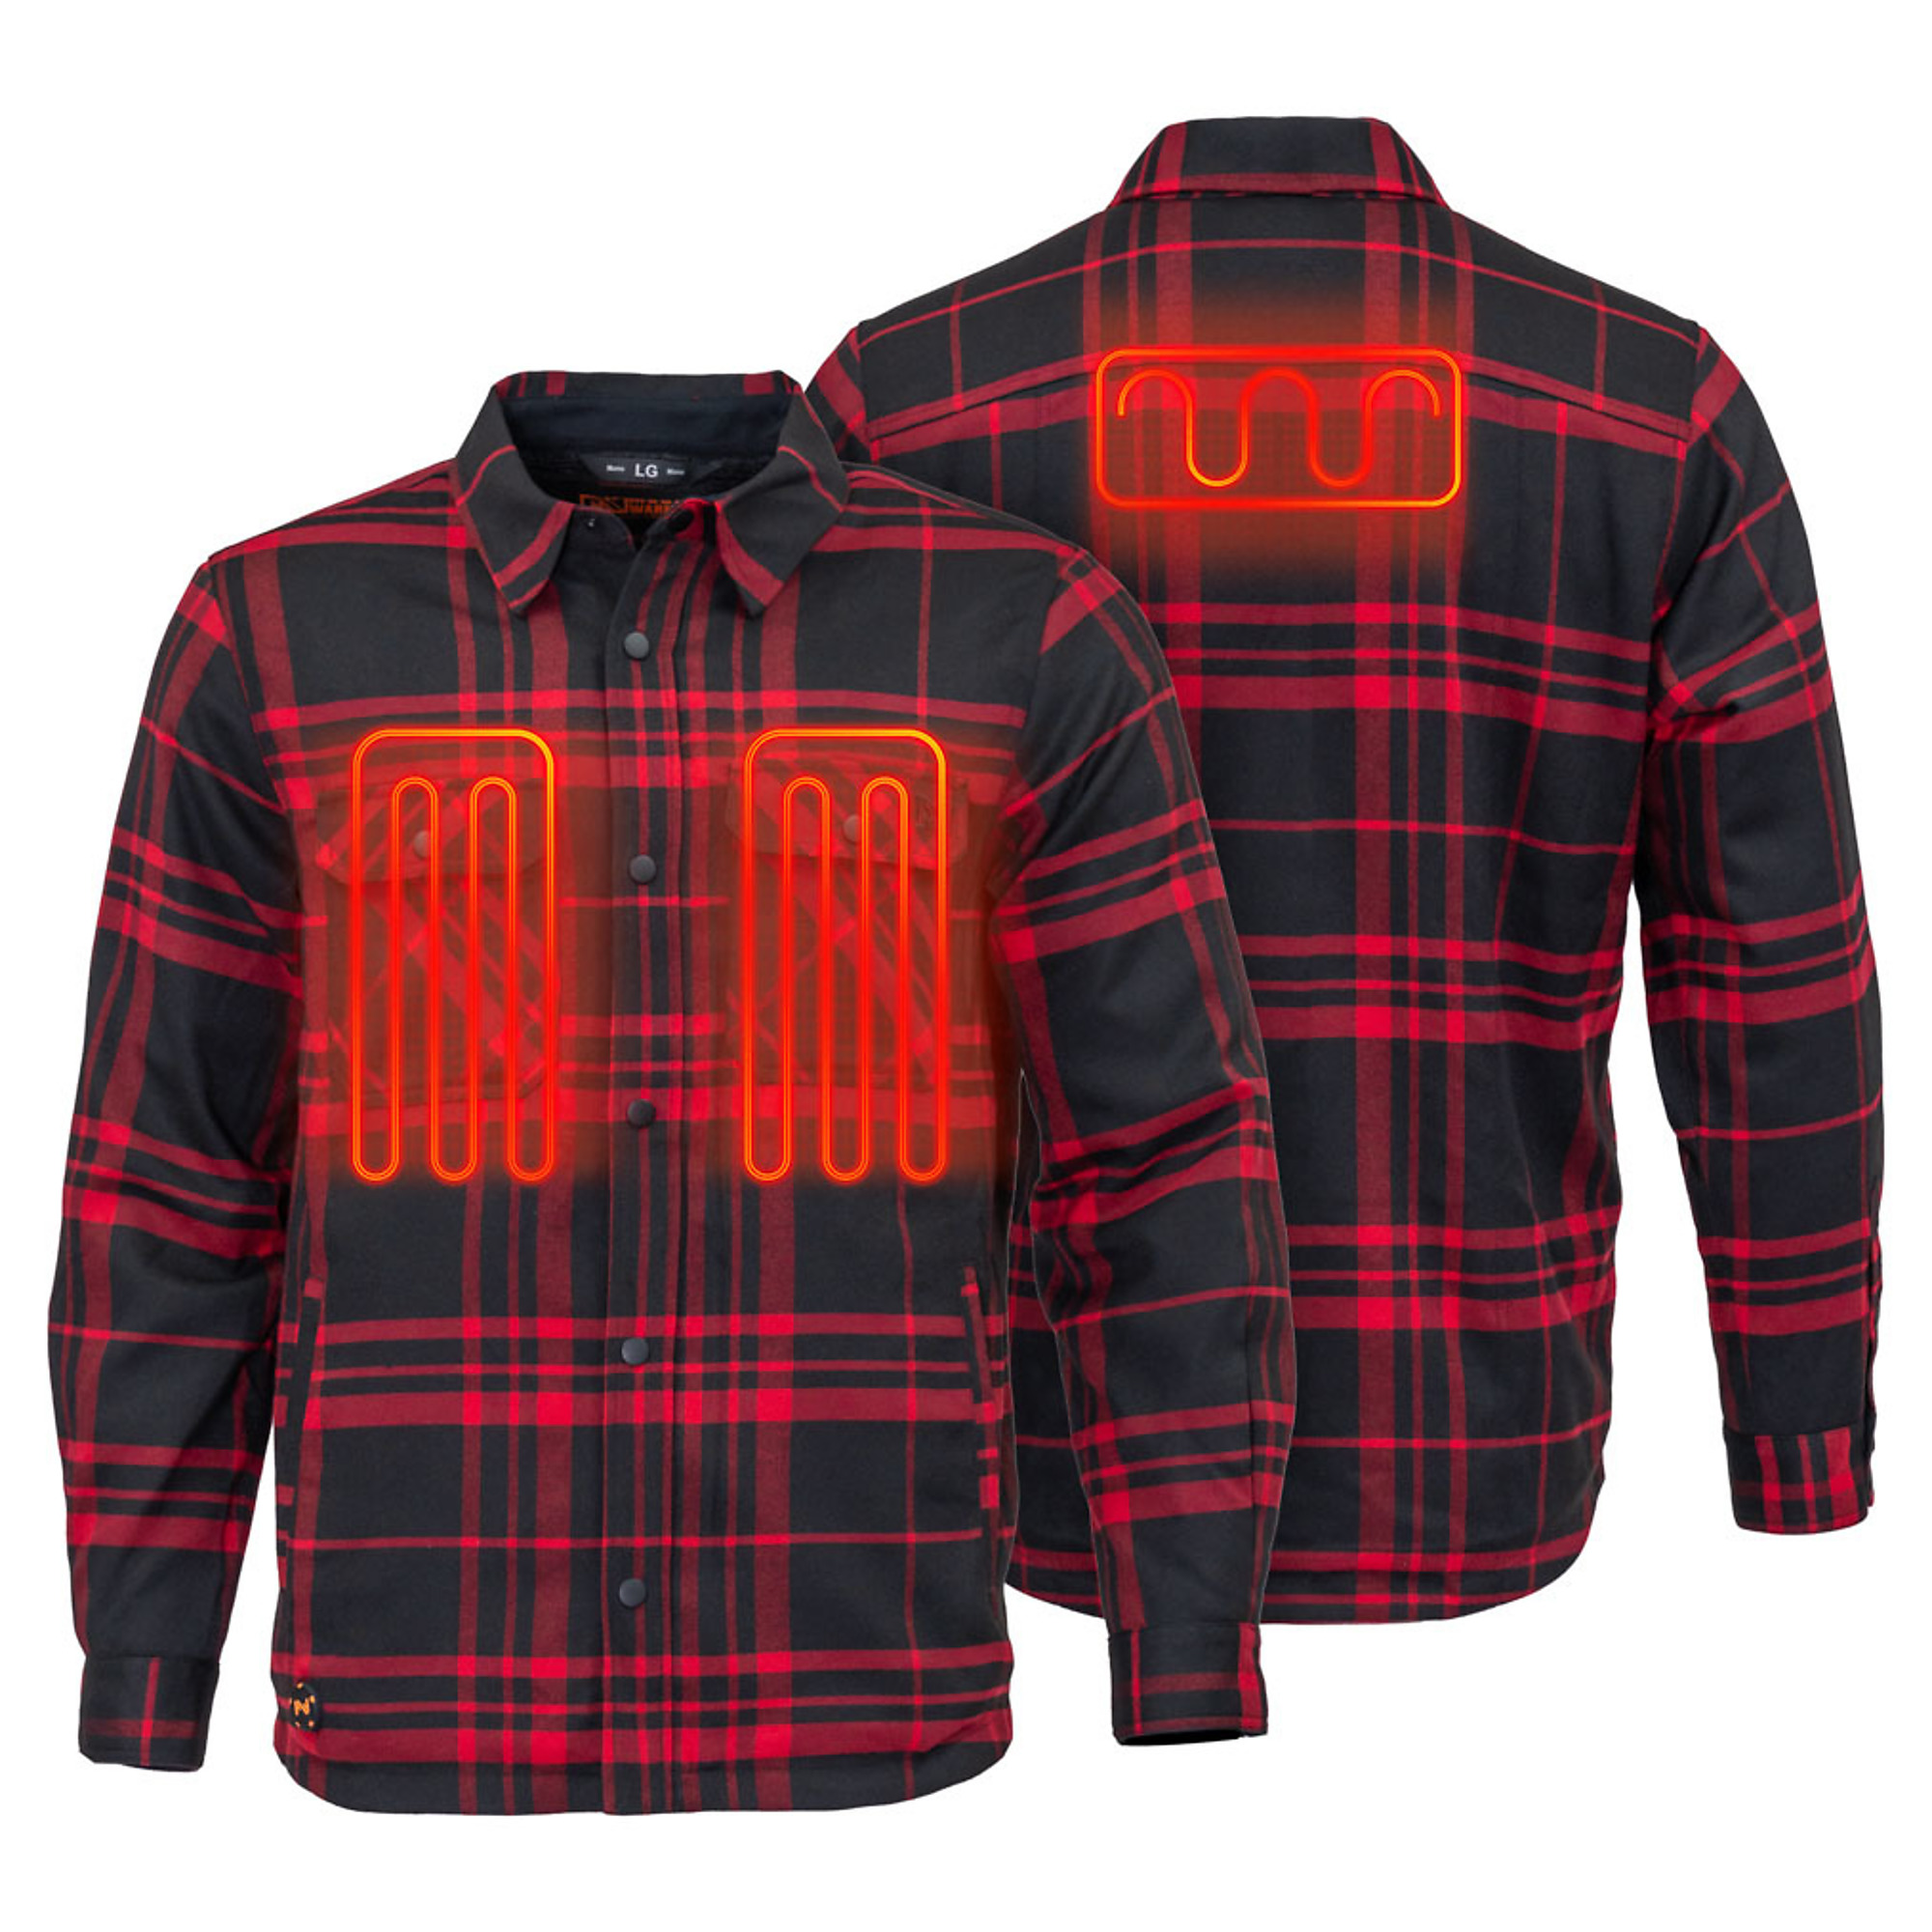 Fieldsheer, Men's Flannel Heated Jacket with 7.4v Battery, Size 2XL, Color Black / Red, Model MWMJ53010623